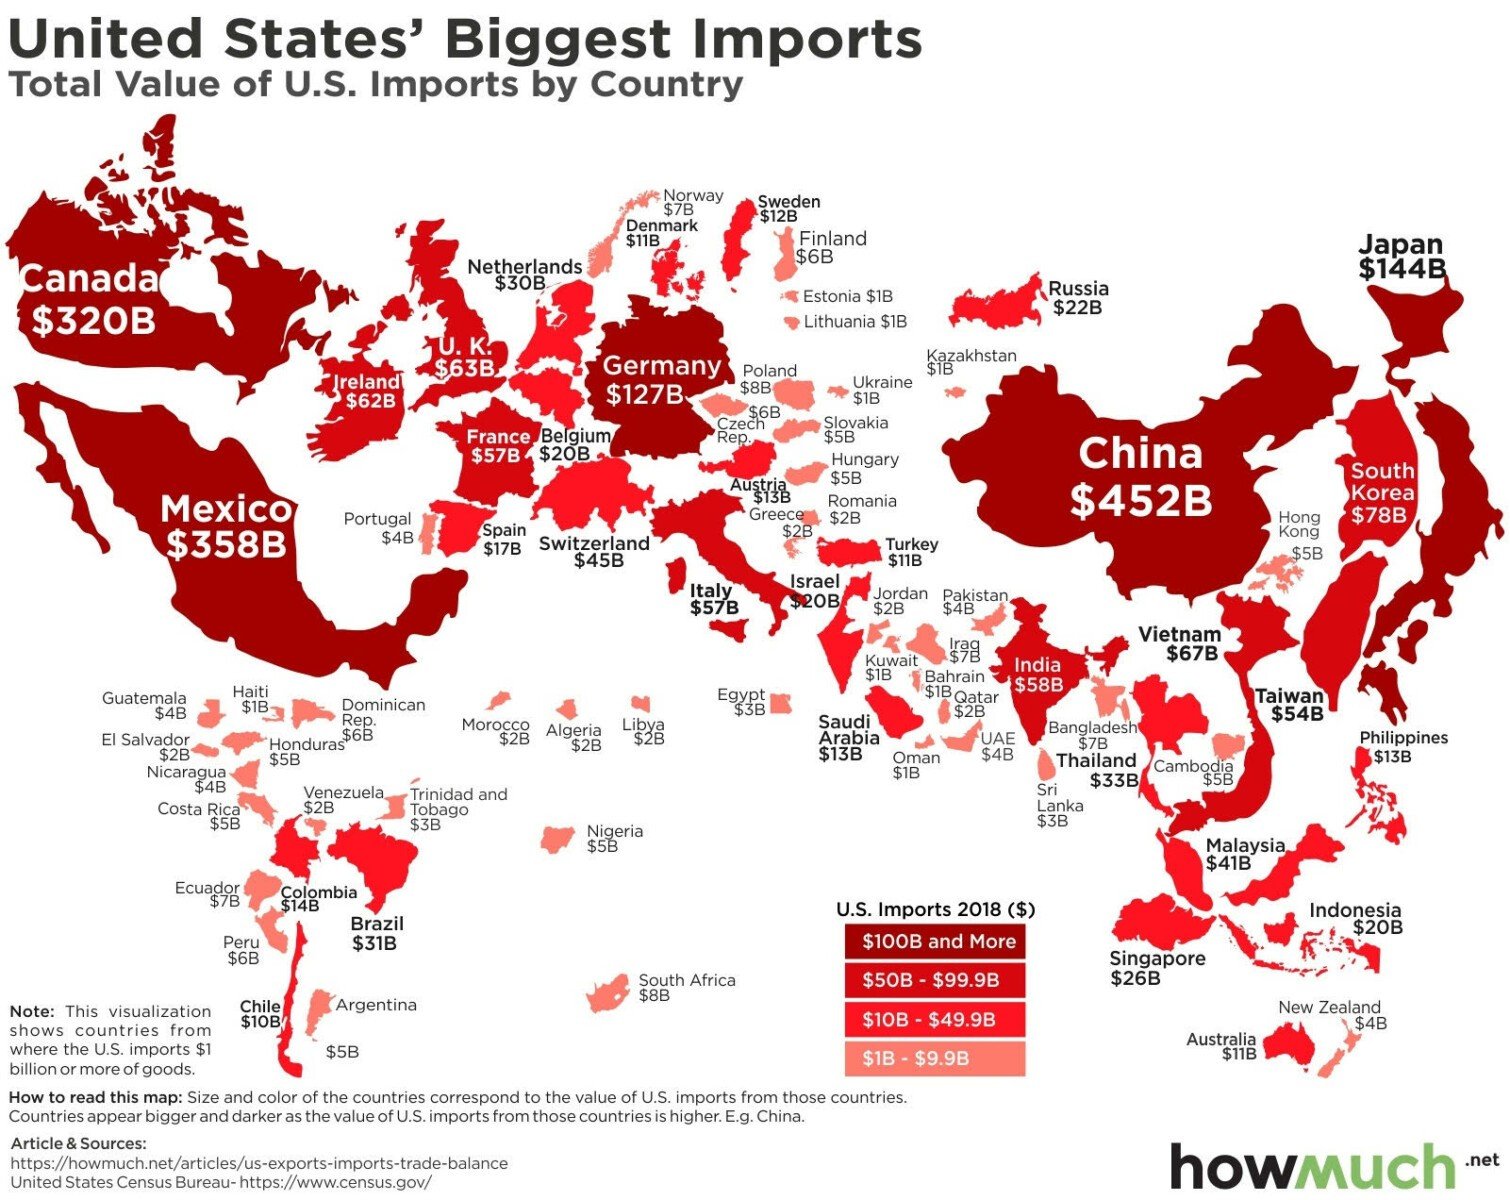 Large imports shown in various shades of red